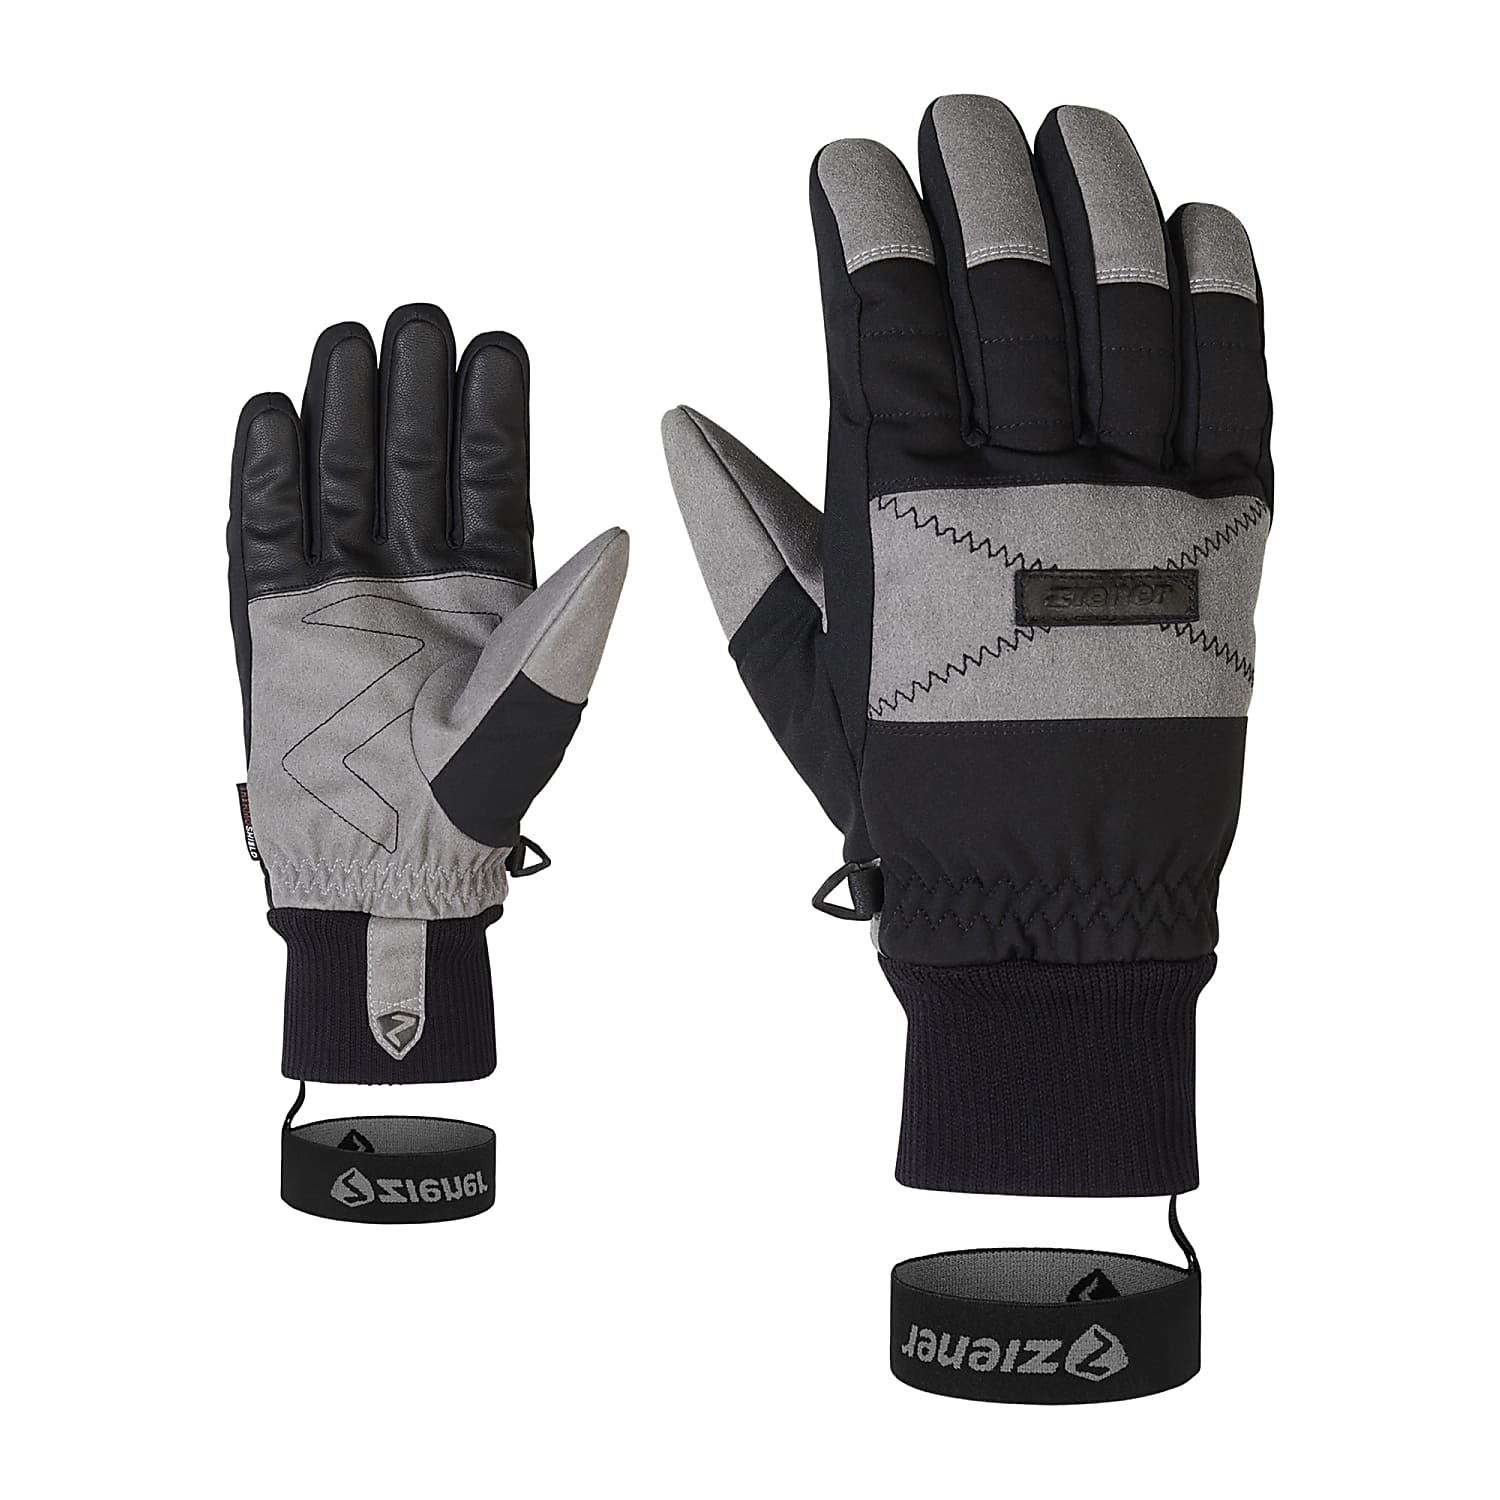 GLOVE, Black cheap and Ziener shipping - GENDO Fast AS